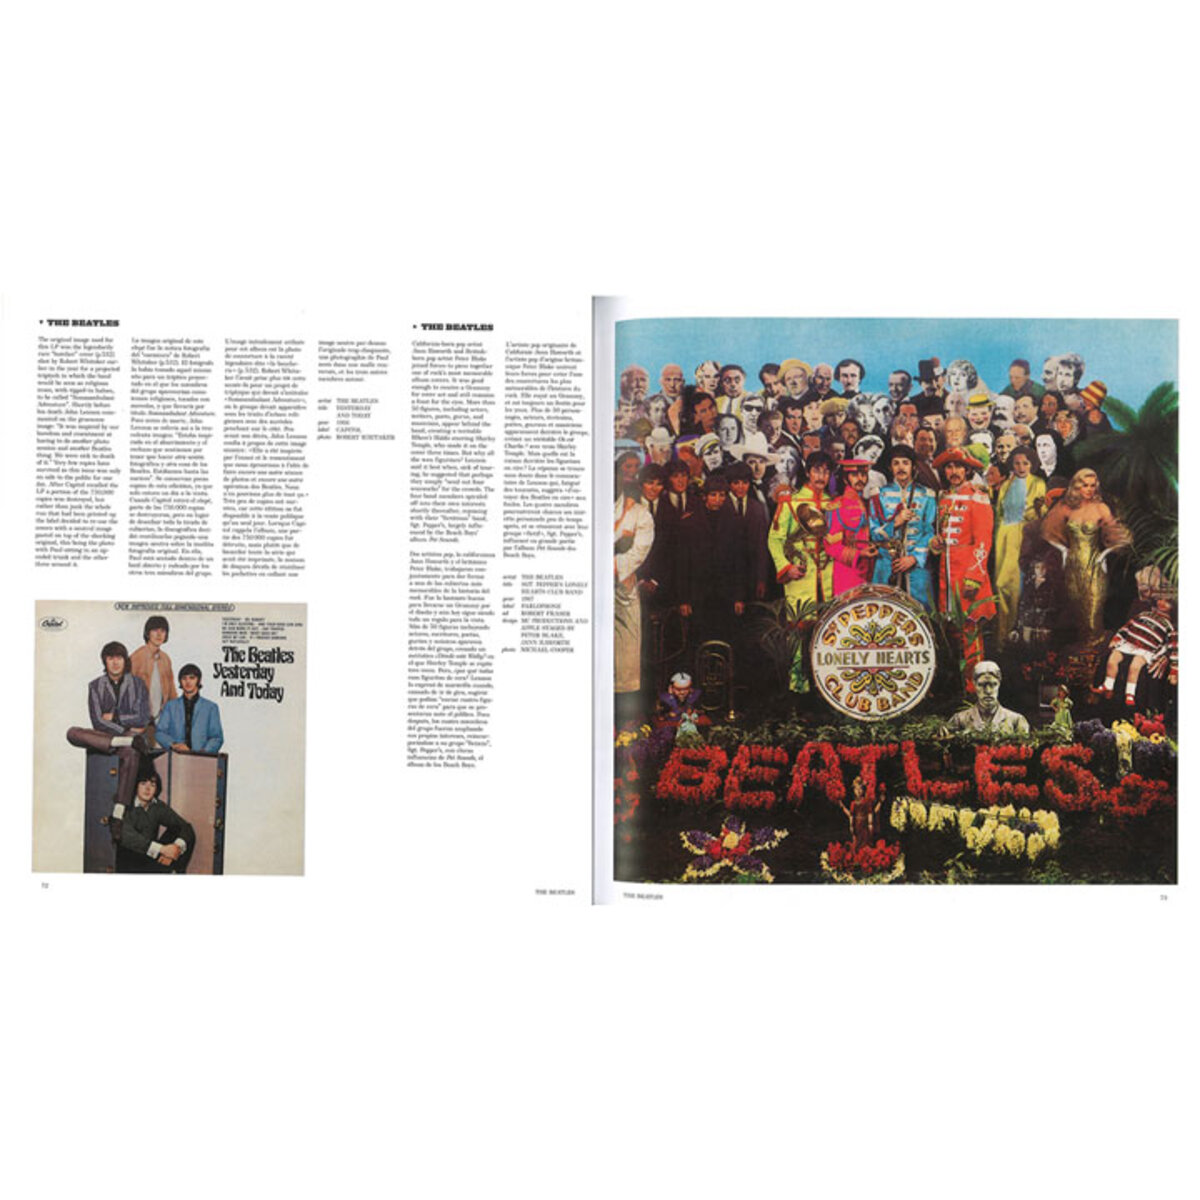 page spread of rock covers